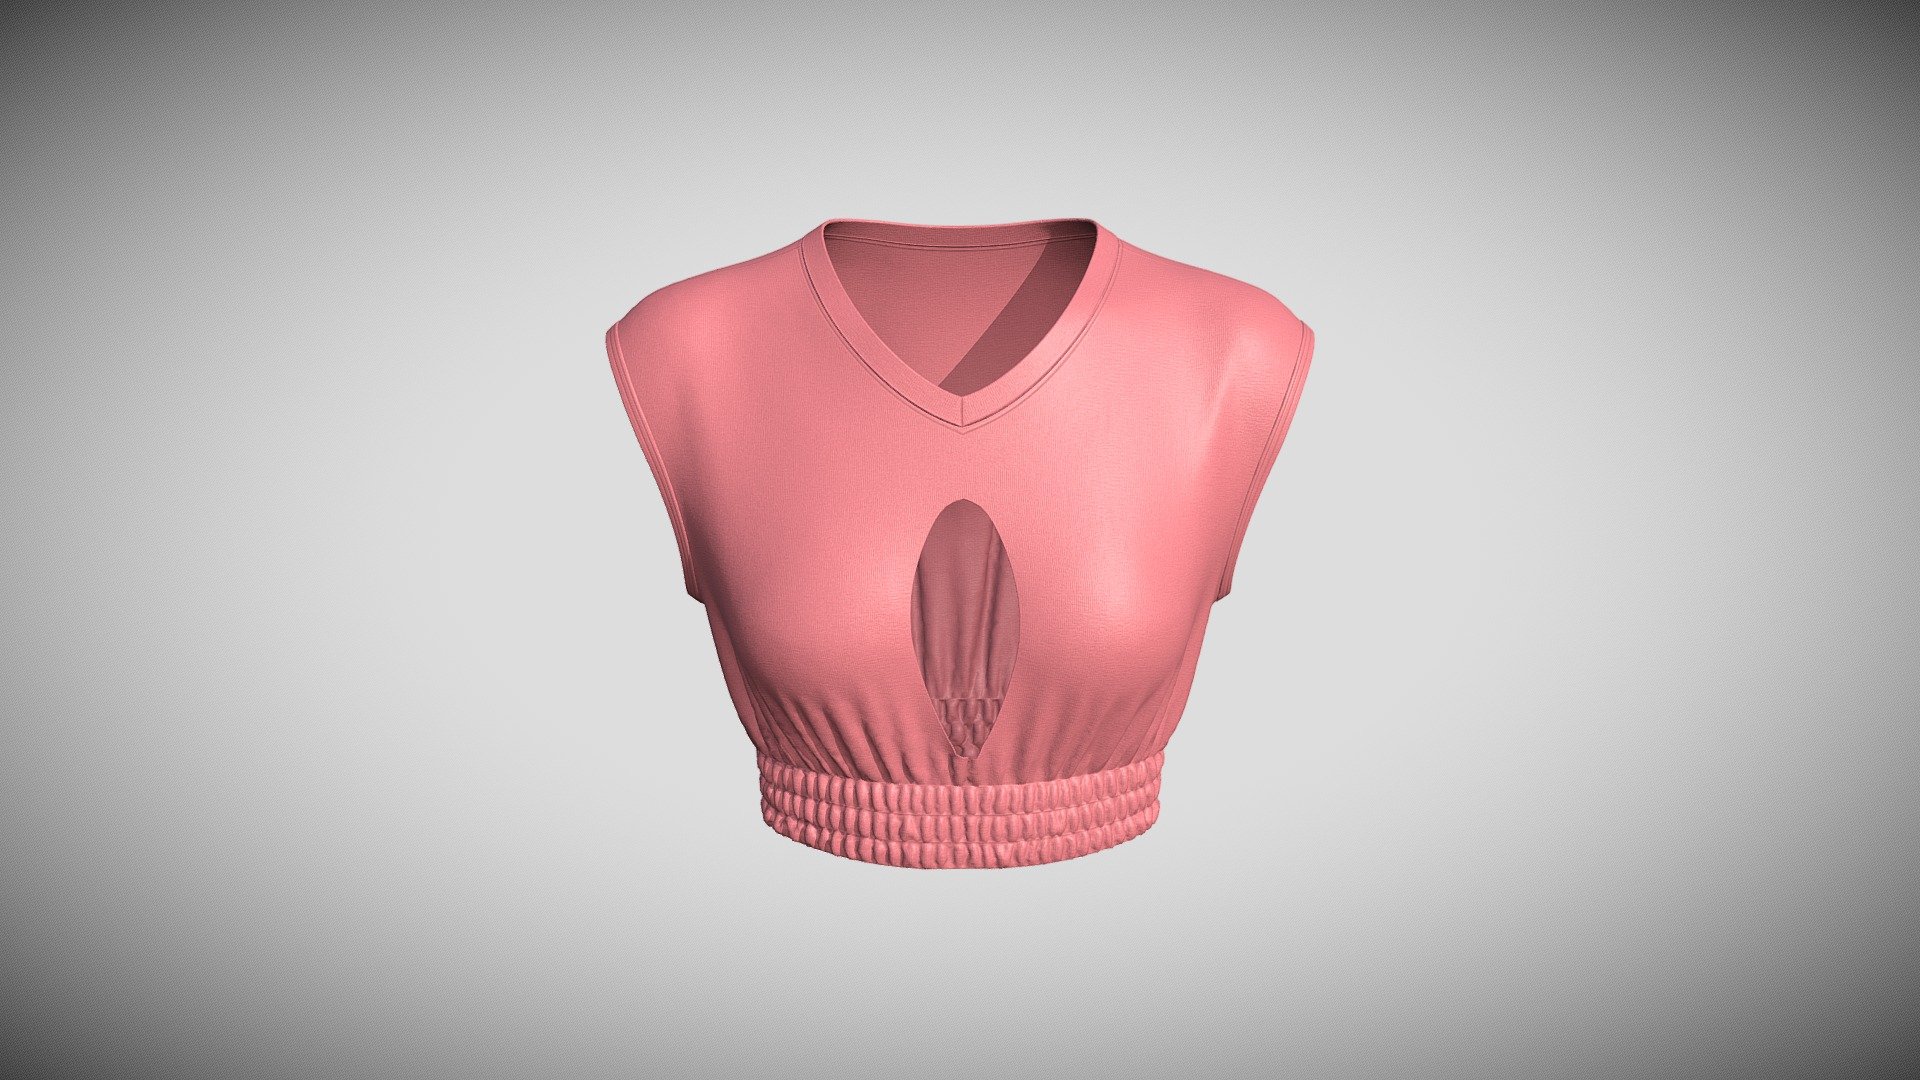 Cloth Title = Fashionable Top Dress Design 

SKU = DG100121 

Category = Women 

Product Type = Fashion Item 

Cloth Length = Cropped 

Body Fit = Relaxed Fit 

Occasion = Casual  


Our Services:

3D Apparel Design.

OBJ,FBX,GLTF Making with High/Low Poly.

Fabric Digitalization.

Mockup making.

3D Teck Pack.

Pattern Making.

2D Illustration.

Cloth Animation and 360 Spin Video.


Contact us:- 

Email: info@digitalfashionwear.com 

Website: https://digitalfashionwear.com 


We designed all the types of cloth specially focused on product visualization, e-commerce, fitting, and production. 

We will design: 

T-shirts 

Polo shirts 

Hoodies 

Sweatshirt 

Jackets 

Shirts 

TankTops 

Trousers 

Bras 

Underwear 

Blazer 

Aprons 

Leggings 

and All Fashion items. 





Our goal is to make sure what we provide you, meets your demand 3d model